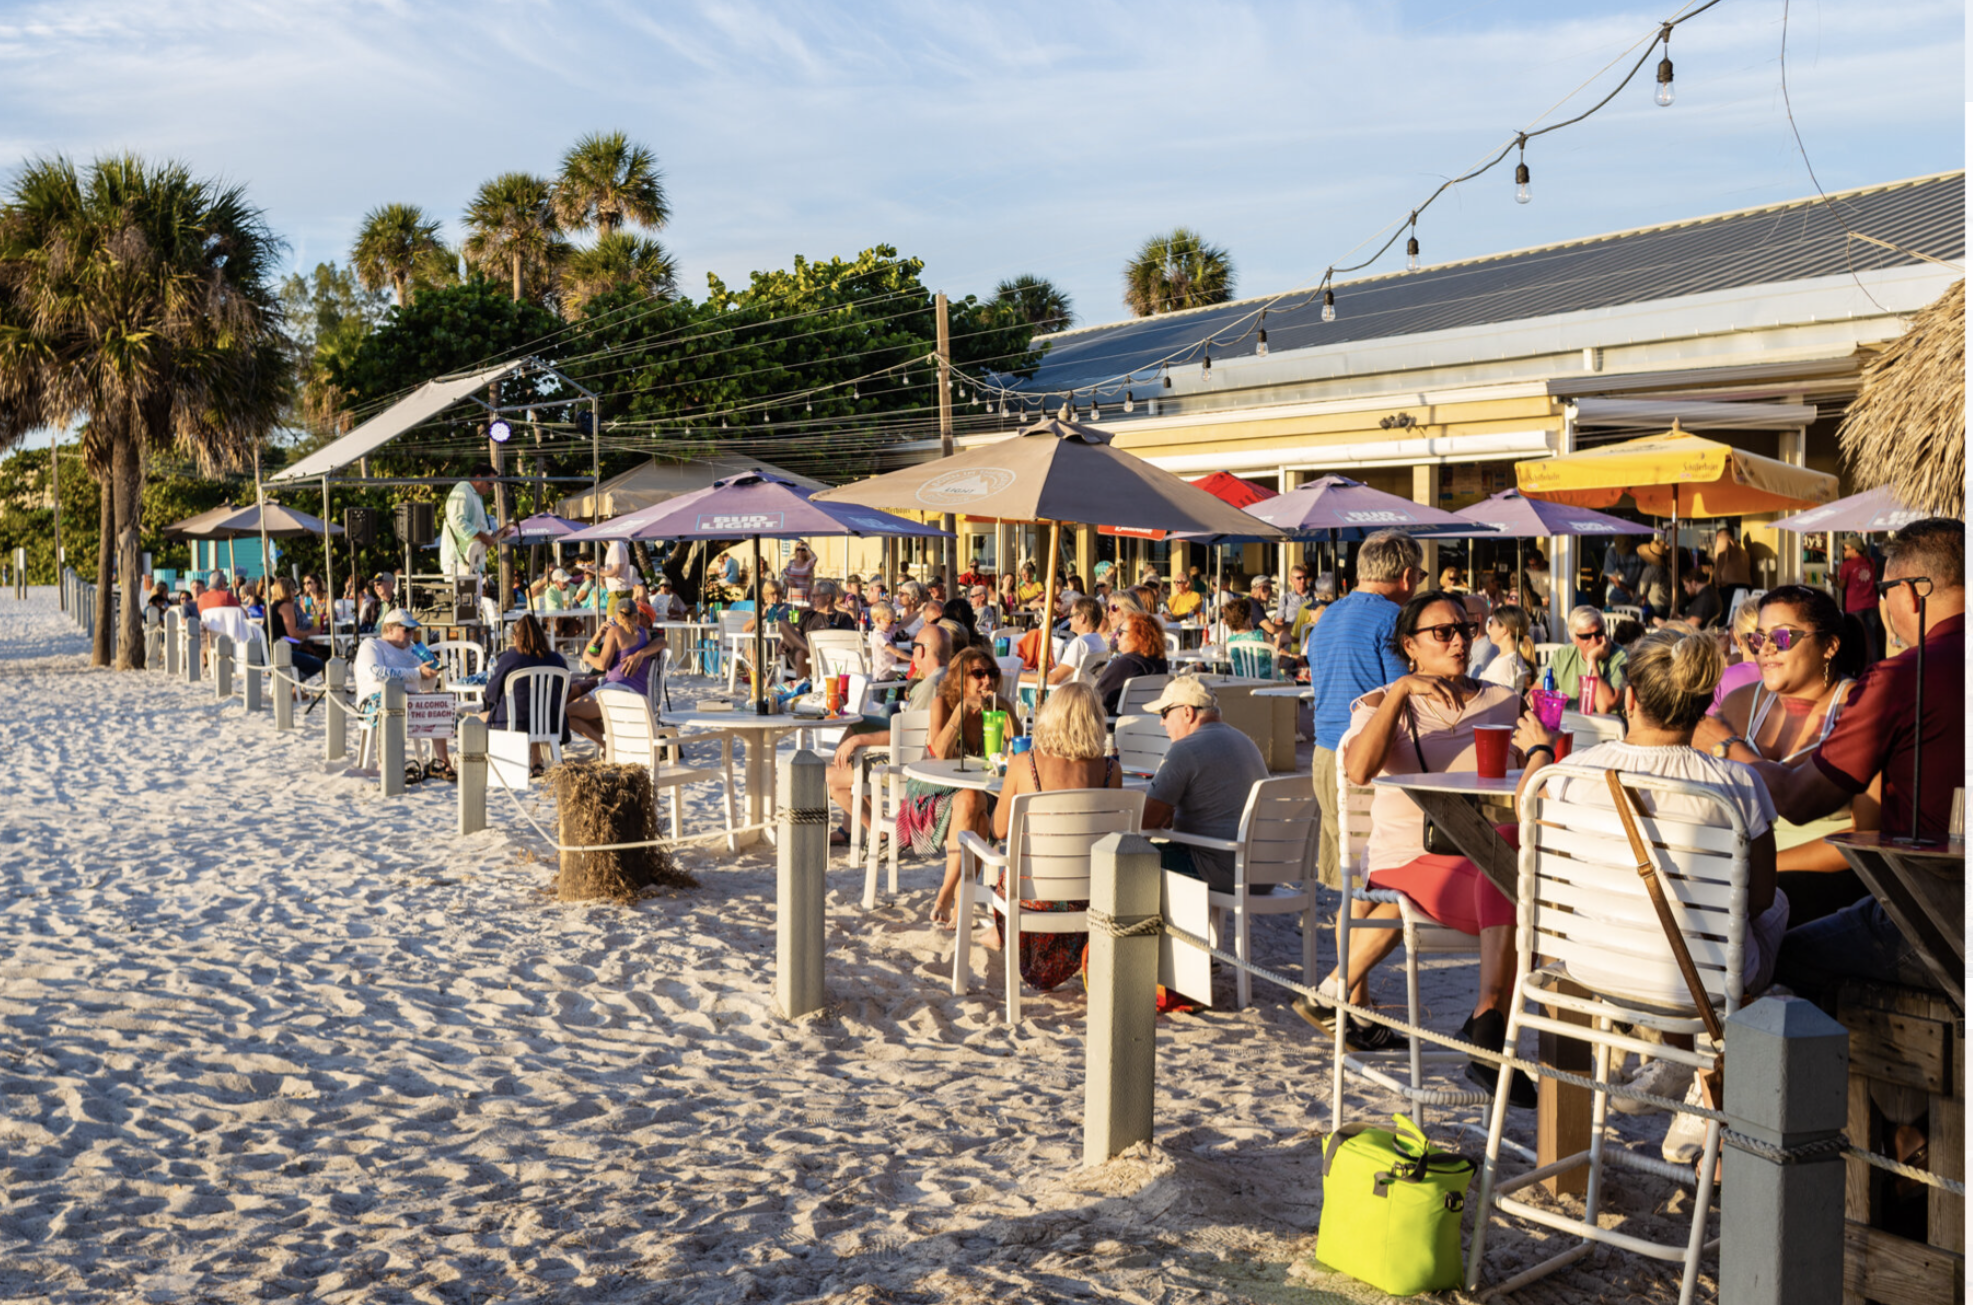 Beach dining scene with guests and visitors eating at the outdoor seating area of Anna Maria Island Beach Cafe